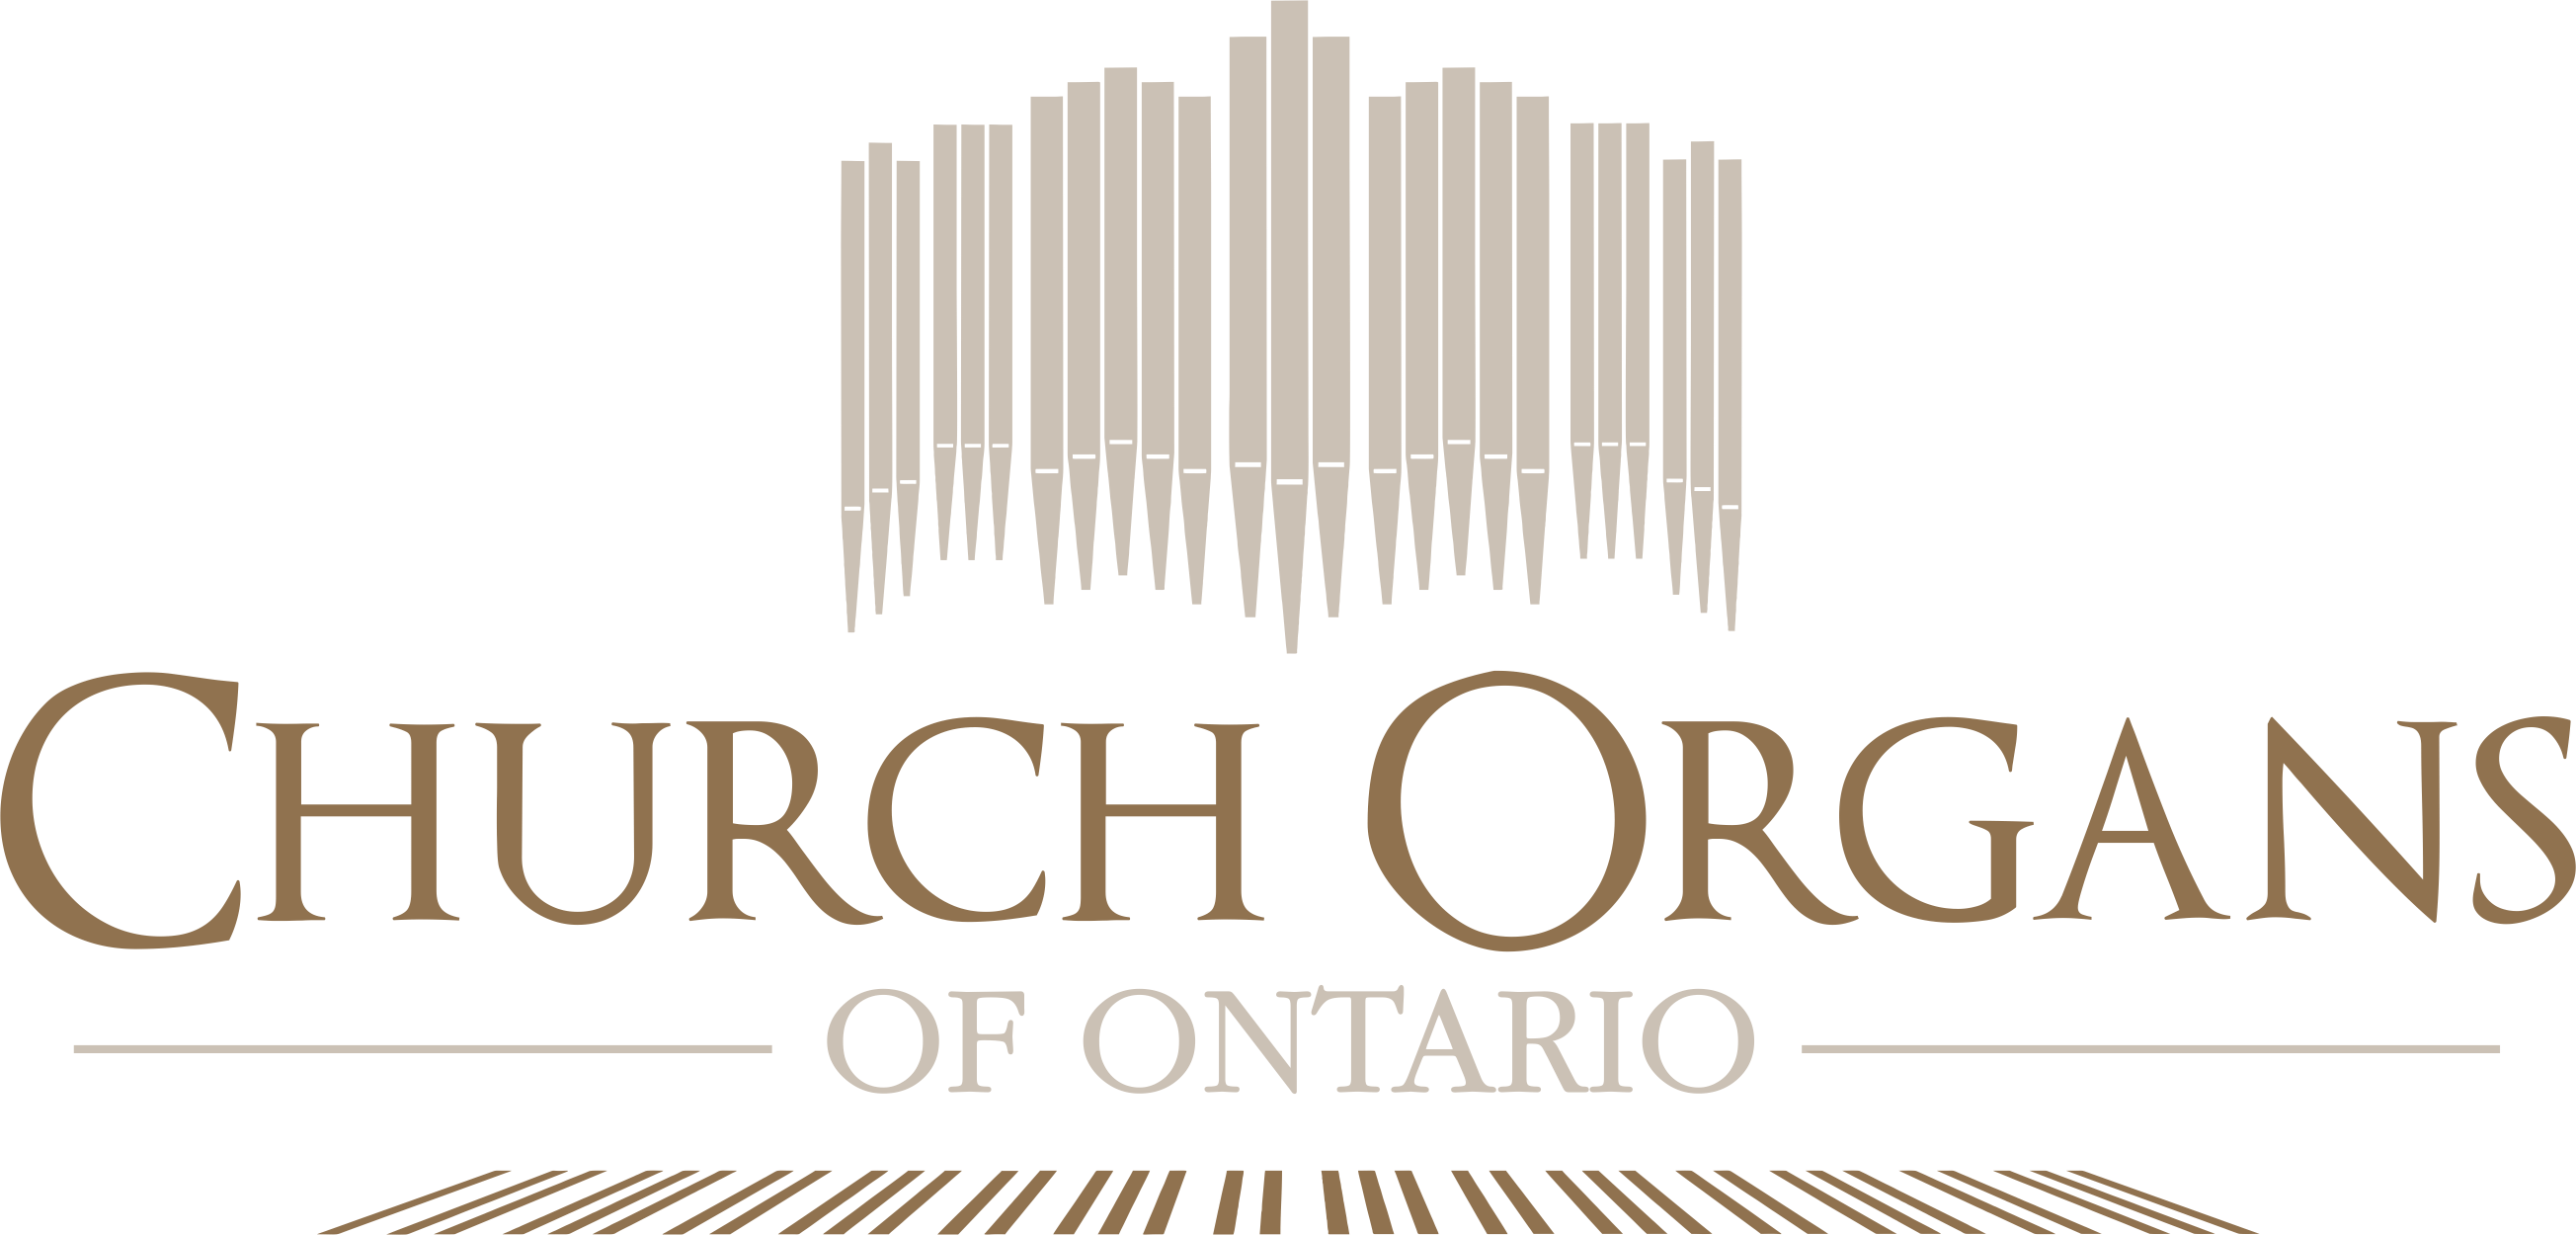 Johannus and Rodgers Church Organs of Ontario